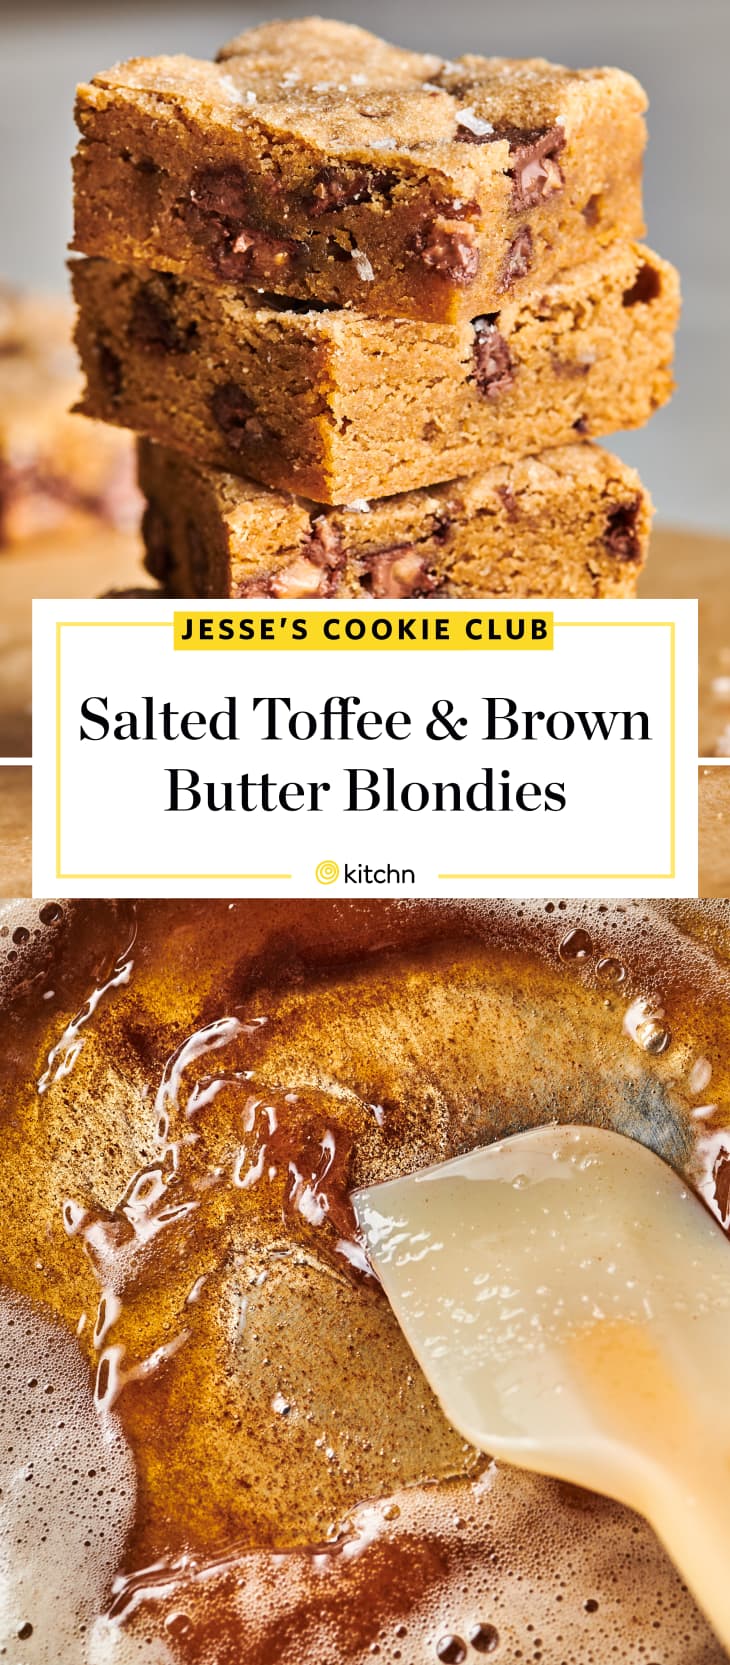 Salted tofee and brown butter blondies custom pin